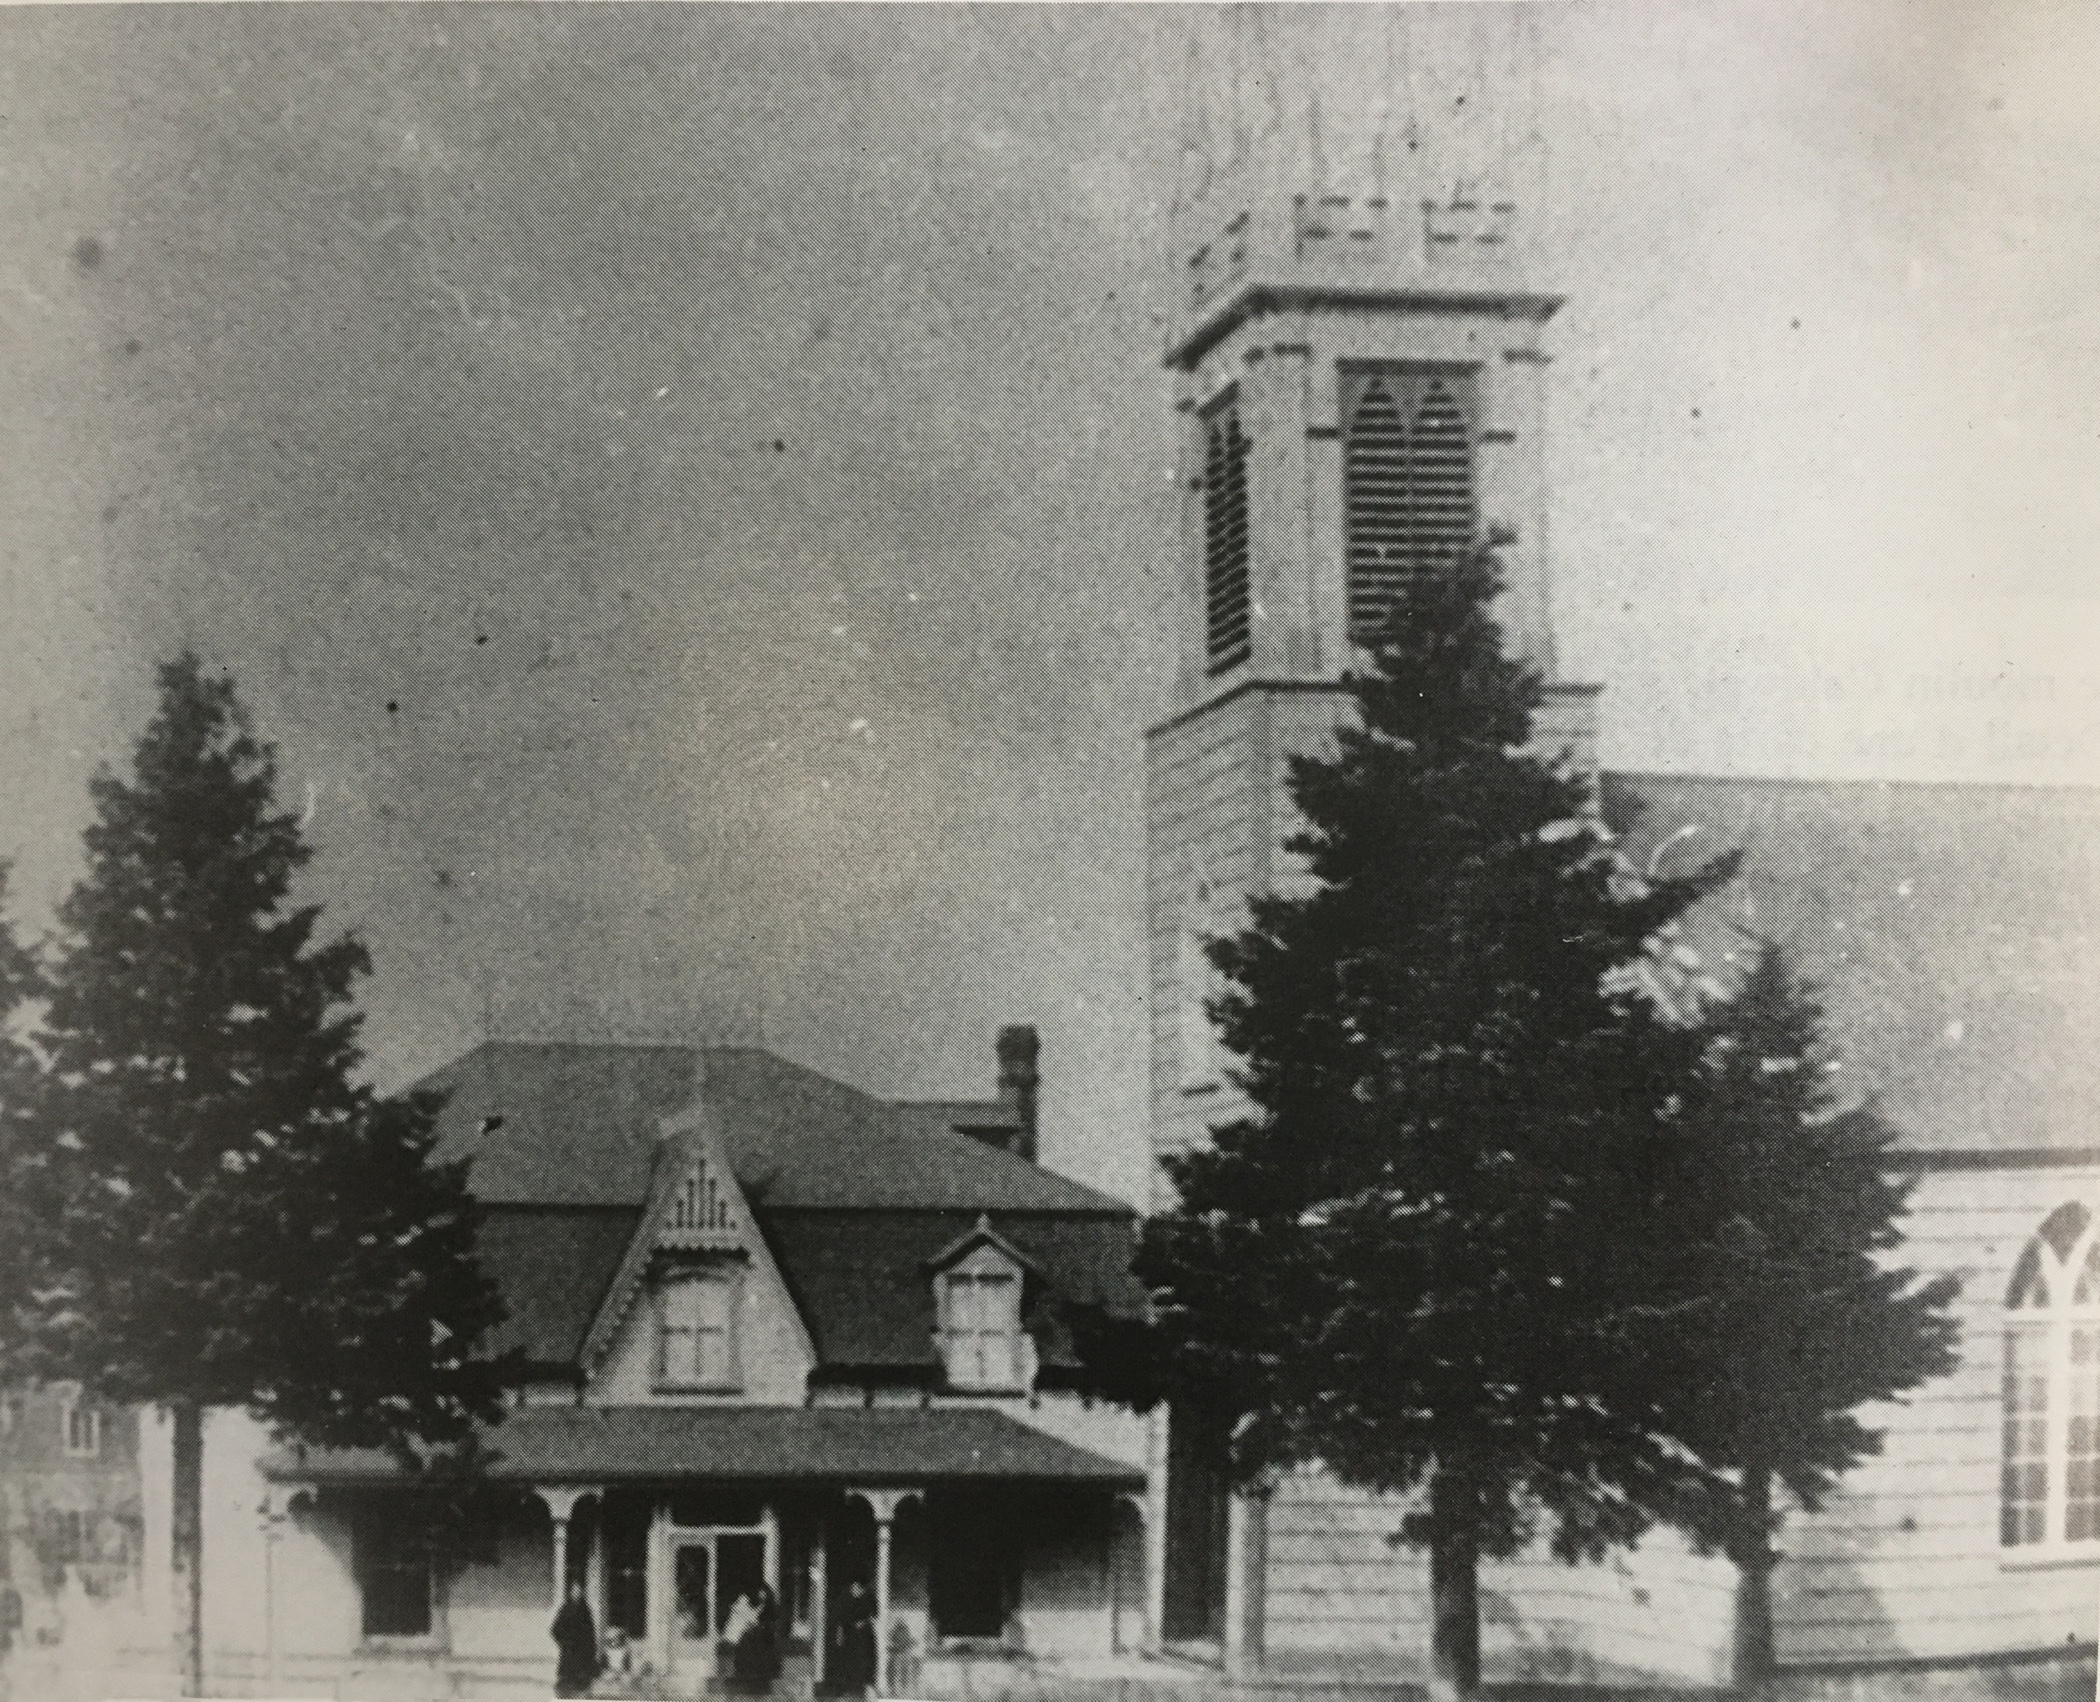 A black and white photograph of an old wooden church with a steeple at the front, and a two-storey minister's house erected quite close to the front of the church.